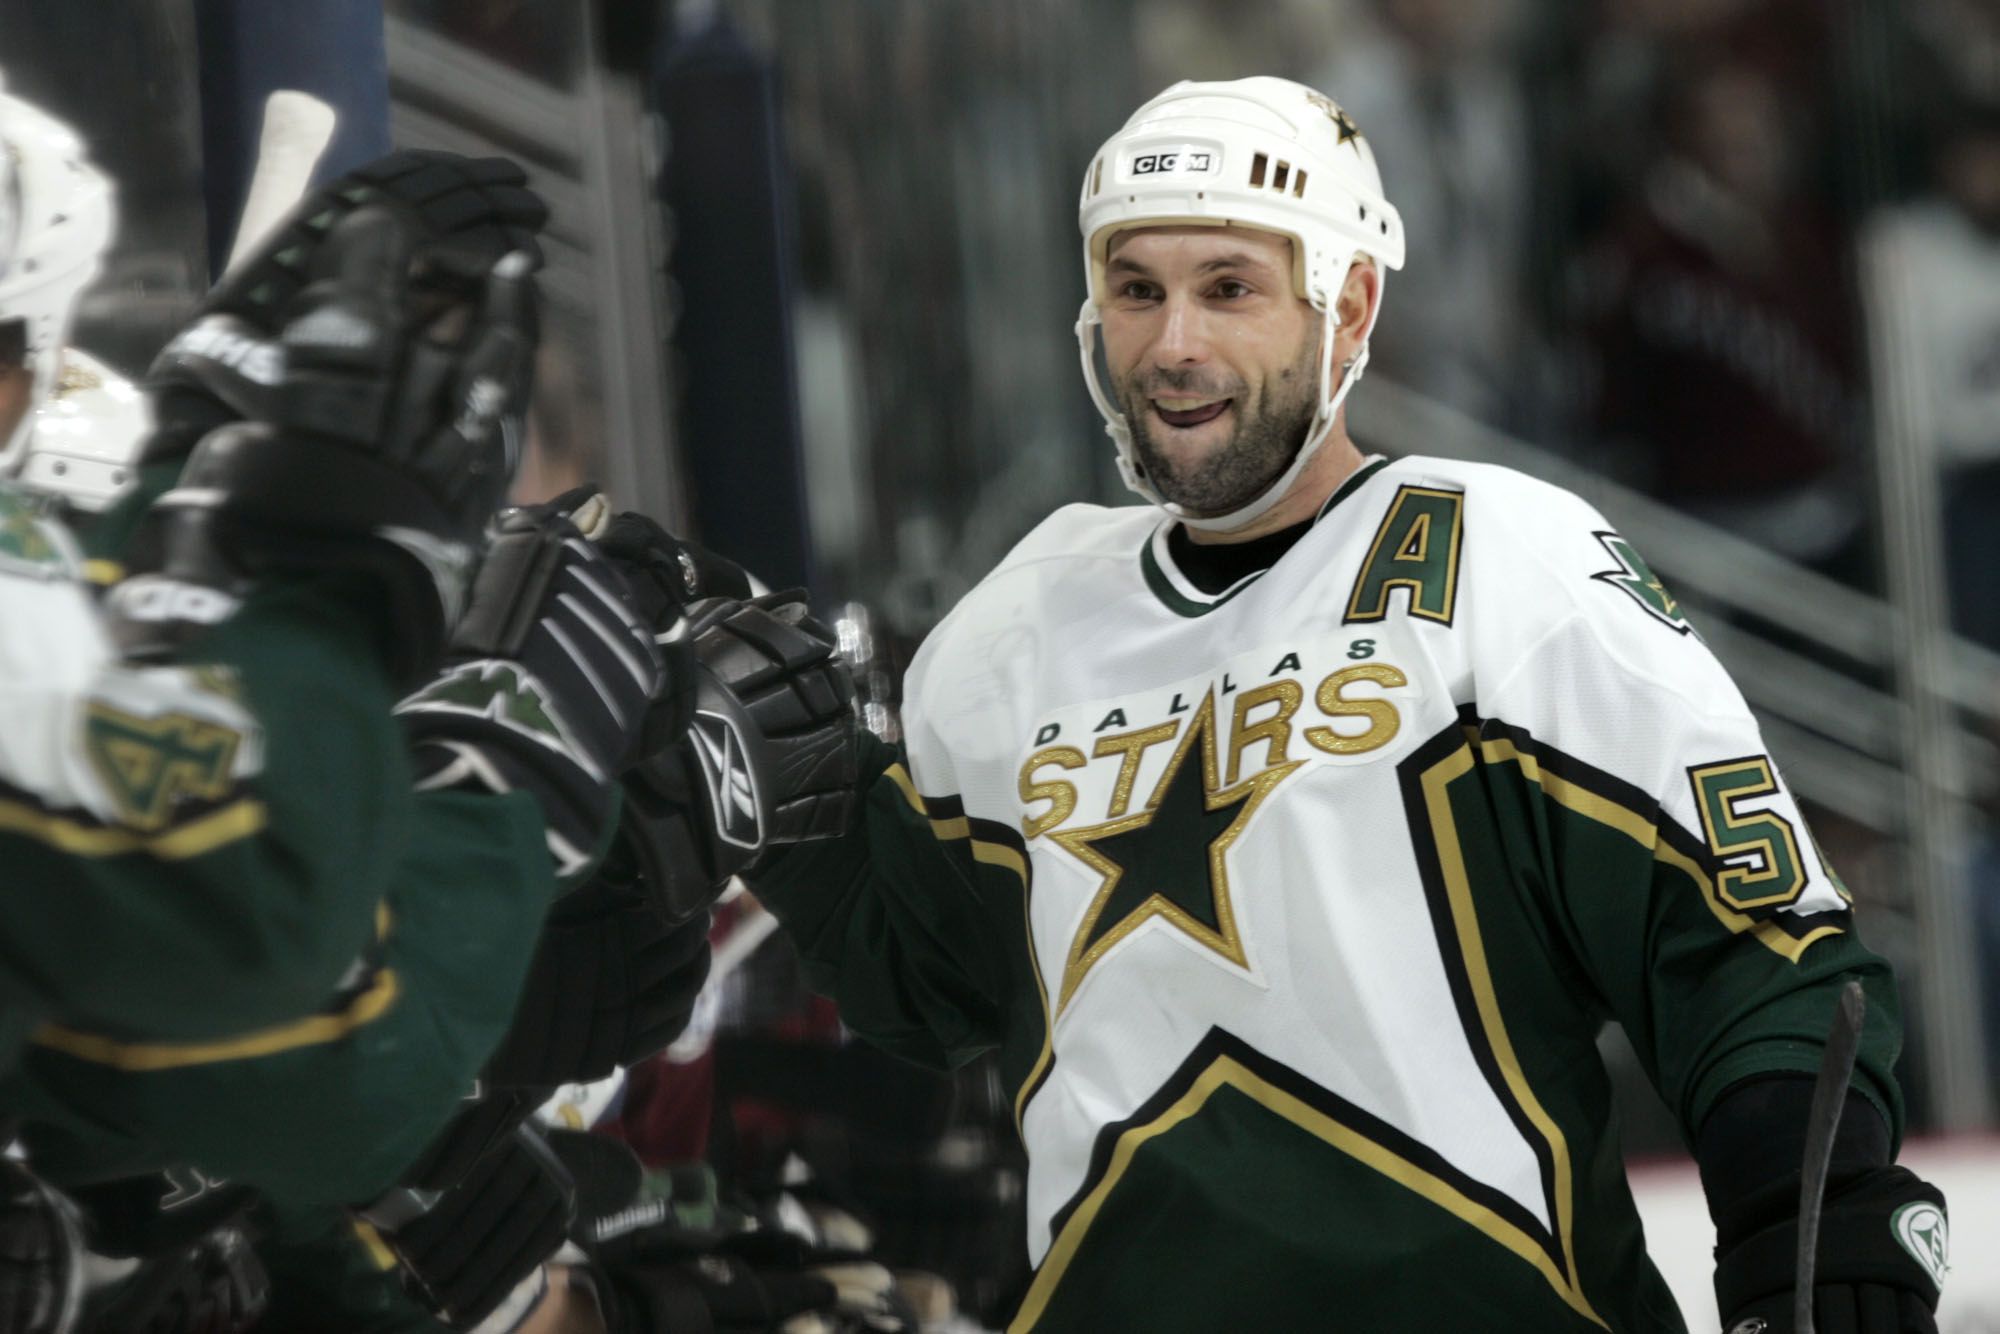 Dallas Stars set to retire Zubov's number; and the NHL jersey